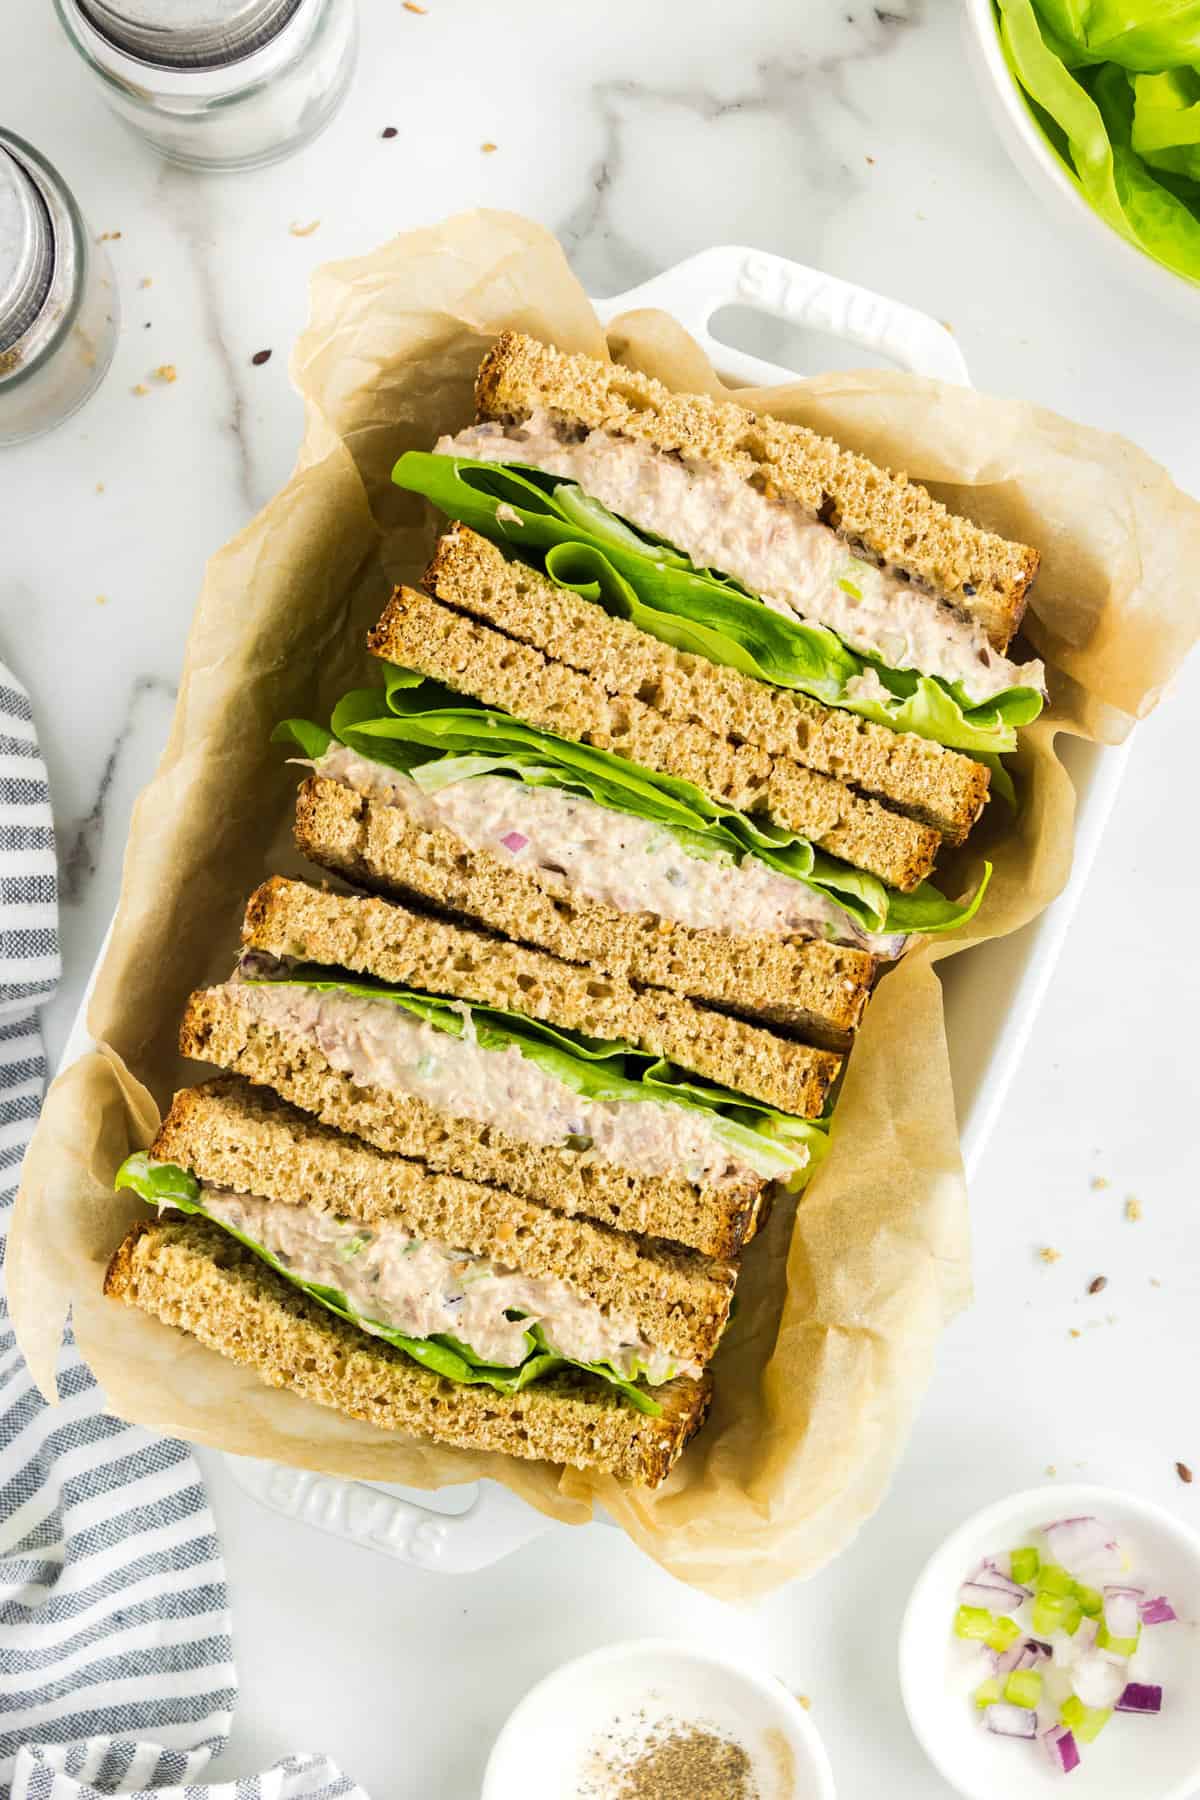 Tuna Salad Sandwiches sliced and stacked